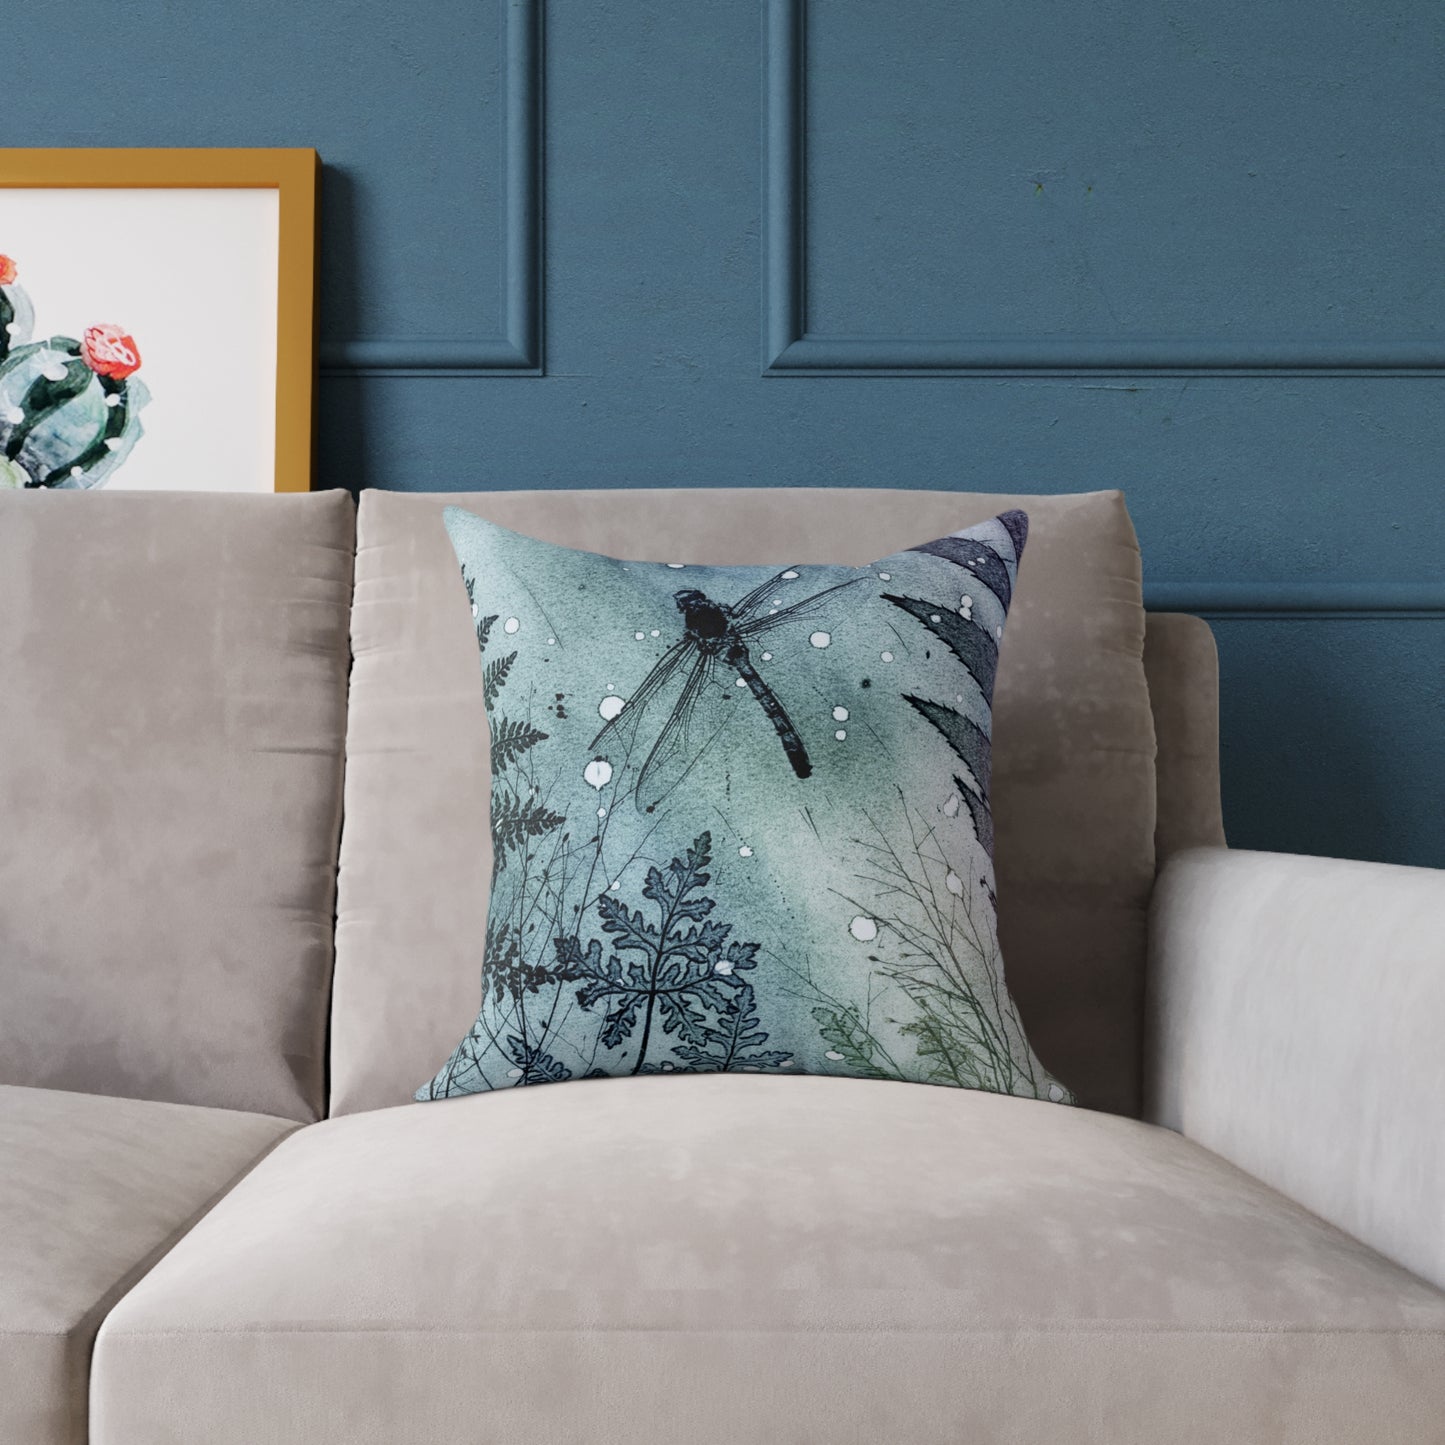 Dark Dragonfly Square Poly Canvas Pillow by Jet James